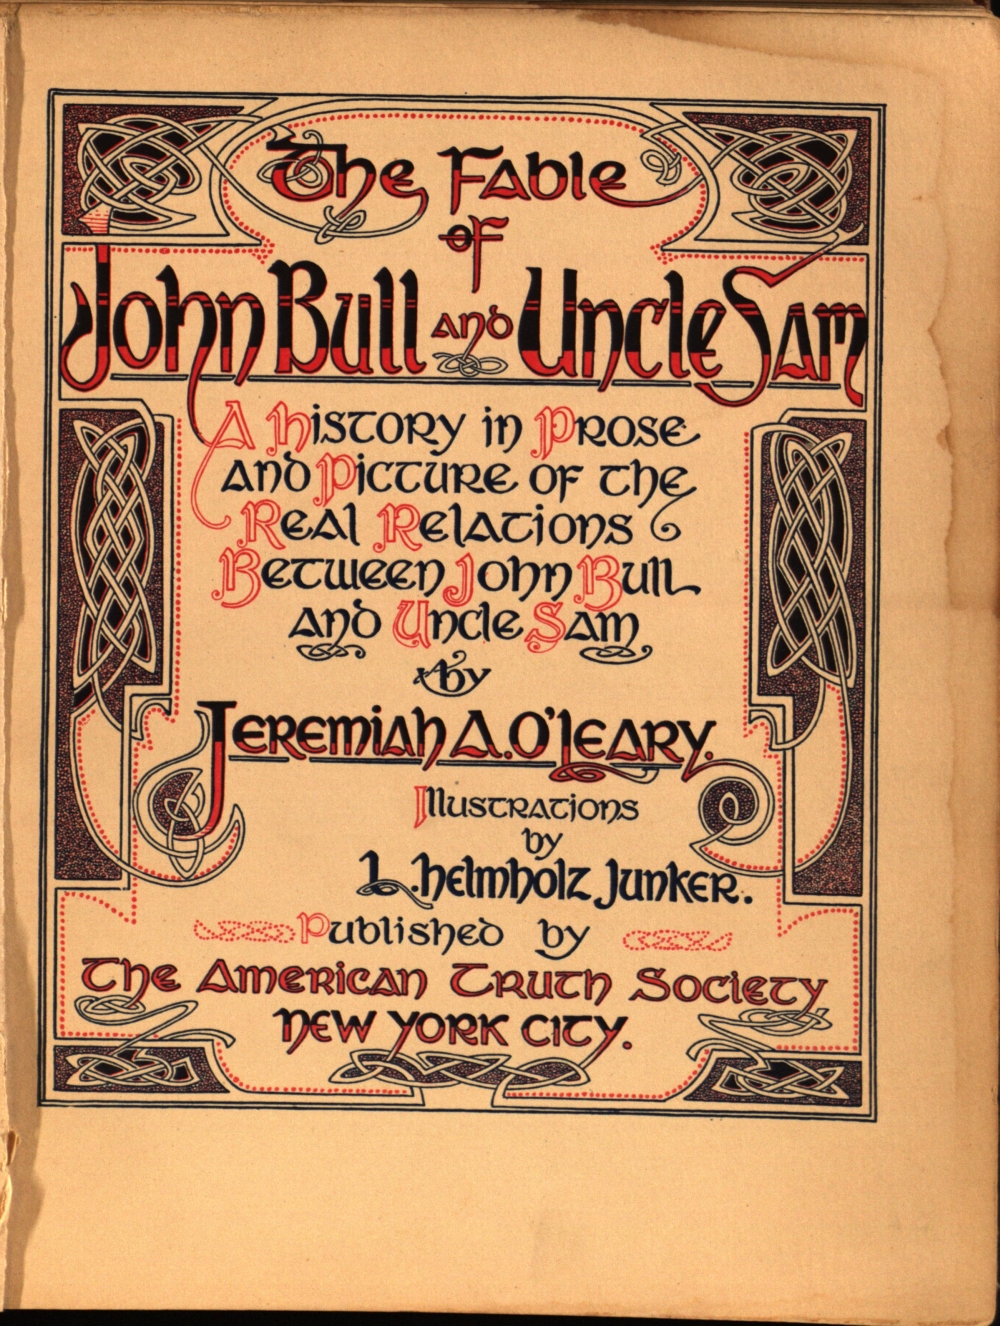 The Fable of John Bull and Uncle Sam - Titlepage